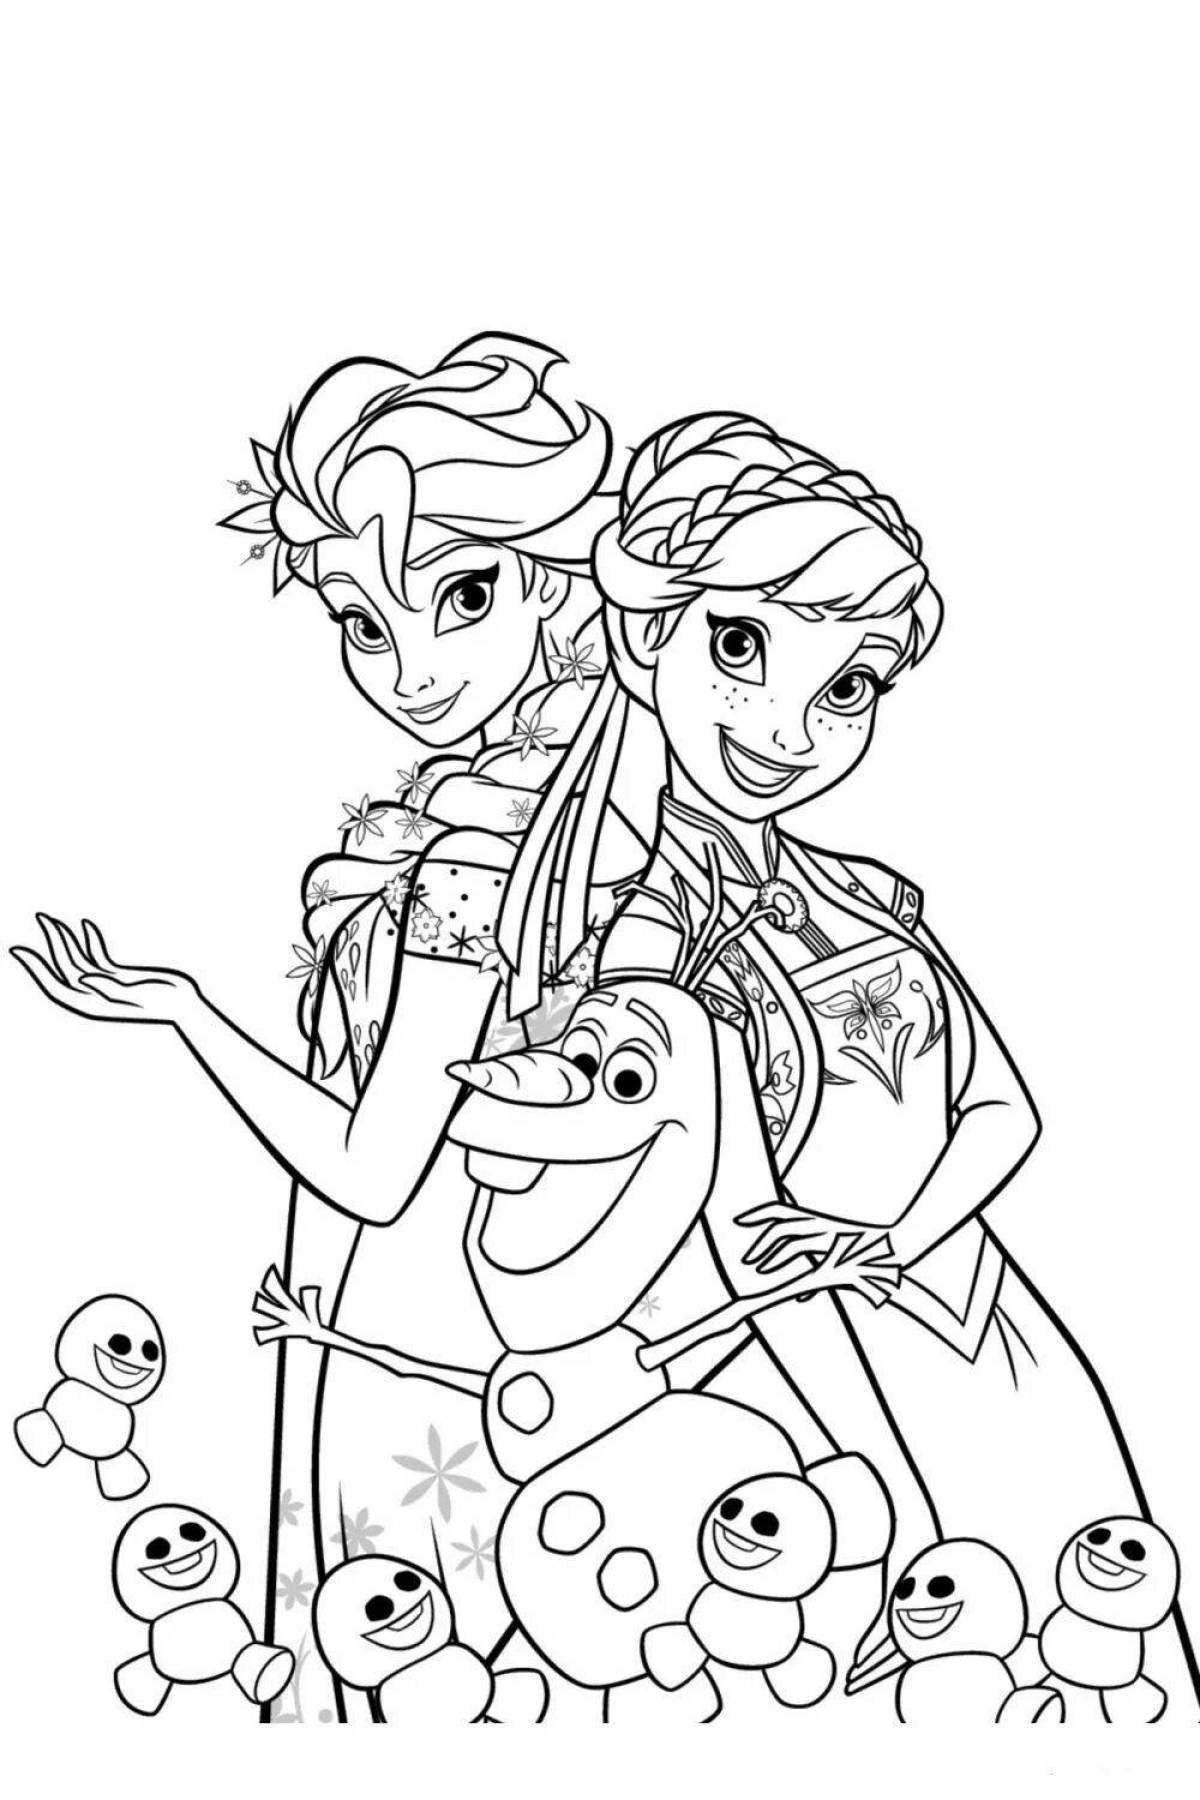 Violent anna and olaf coloring